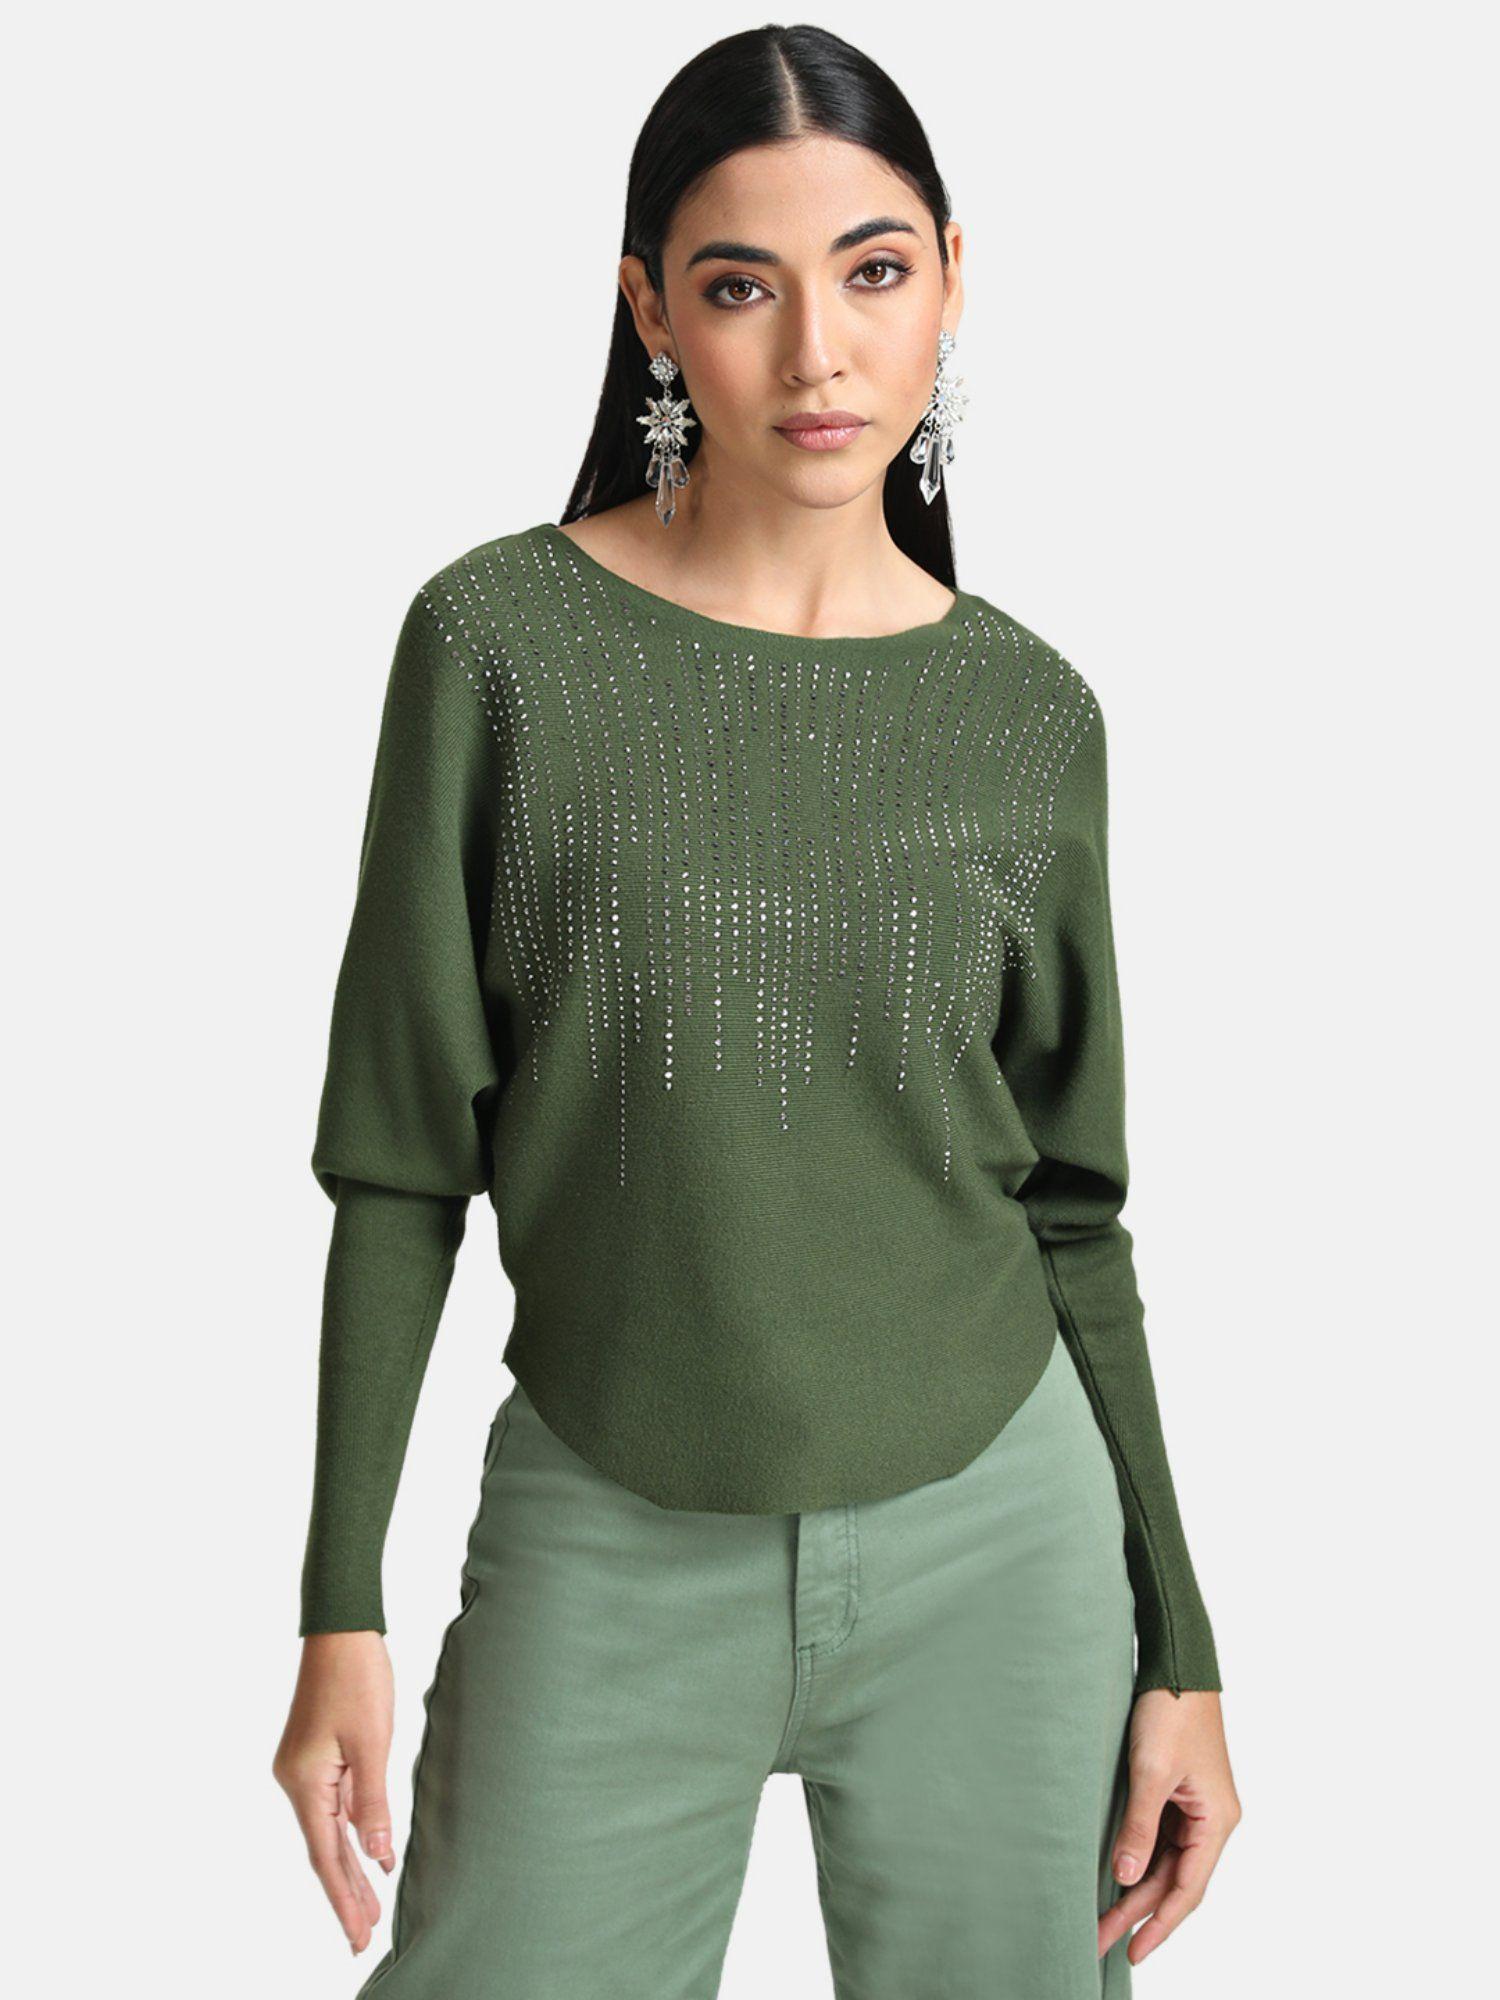 x-janhvi-kapoor-olive-batwing-pullover-with-heat-studs